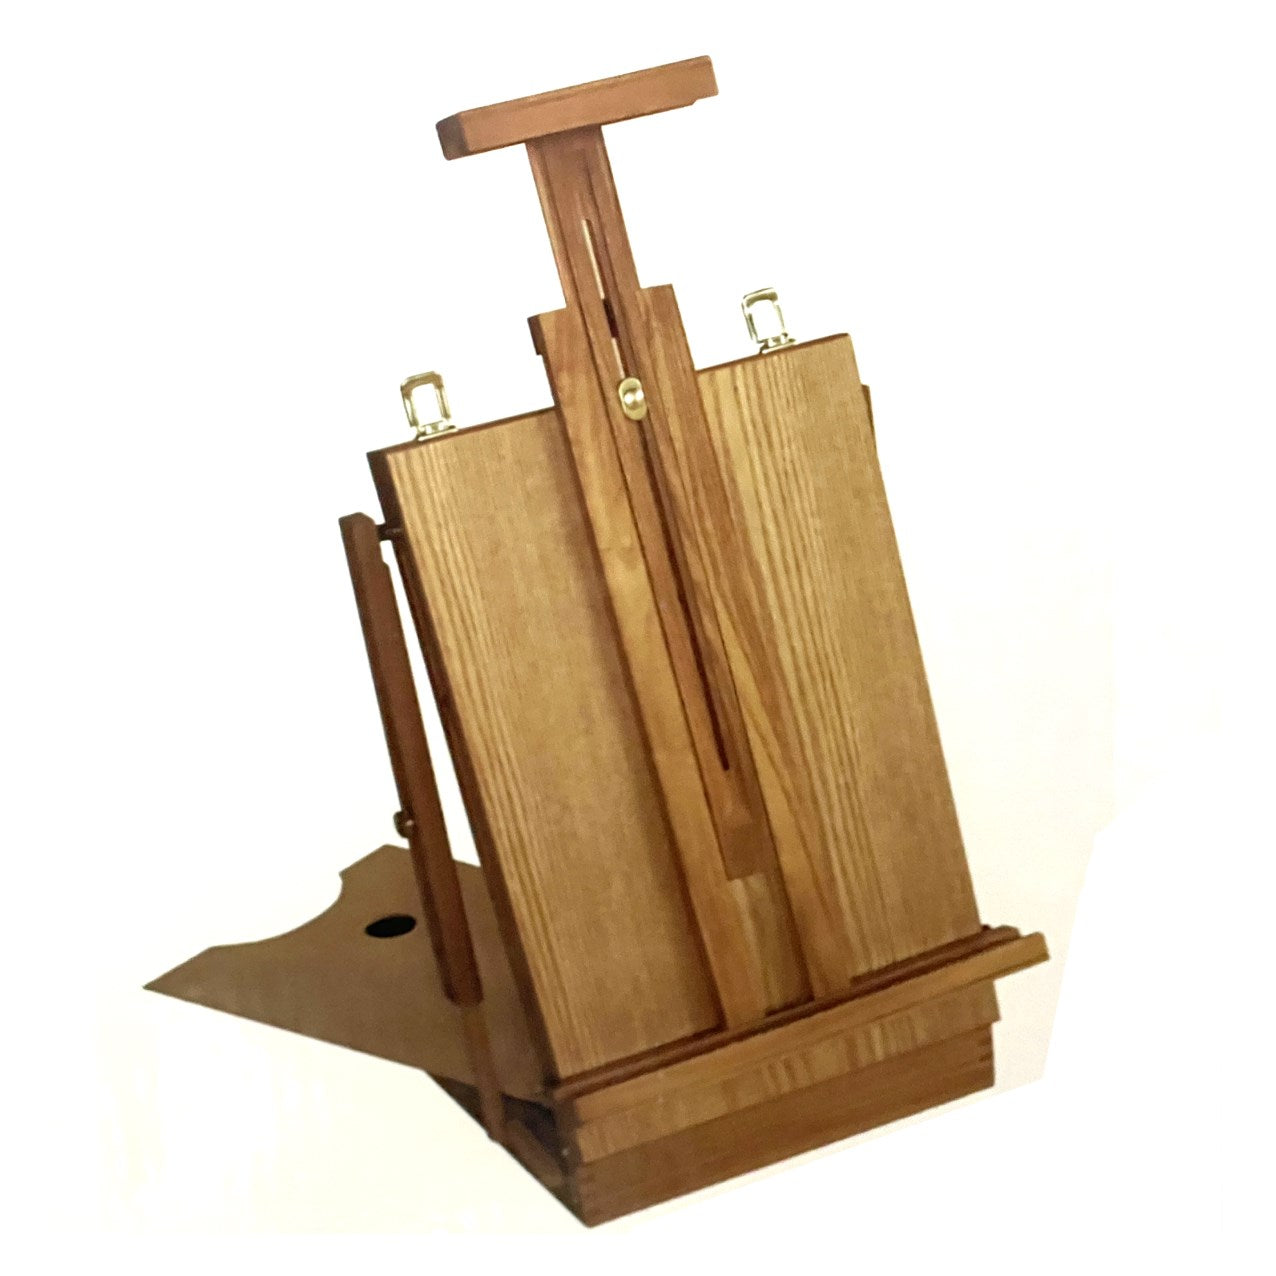 Daler Rowney Wooden Easel Painting Canvas Stand For Painting 40cm